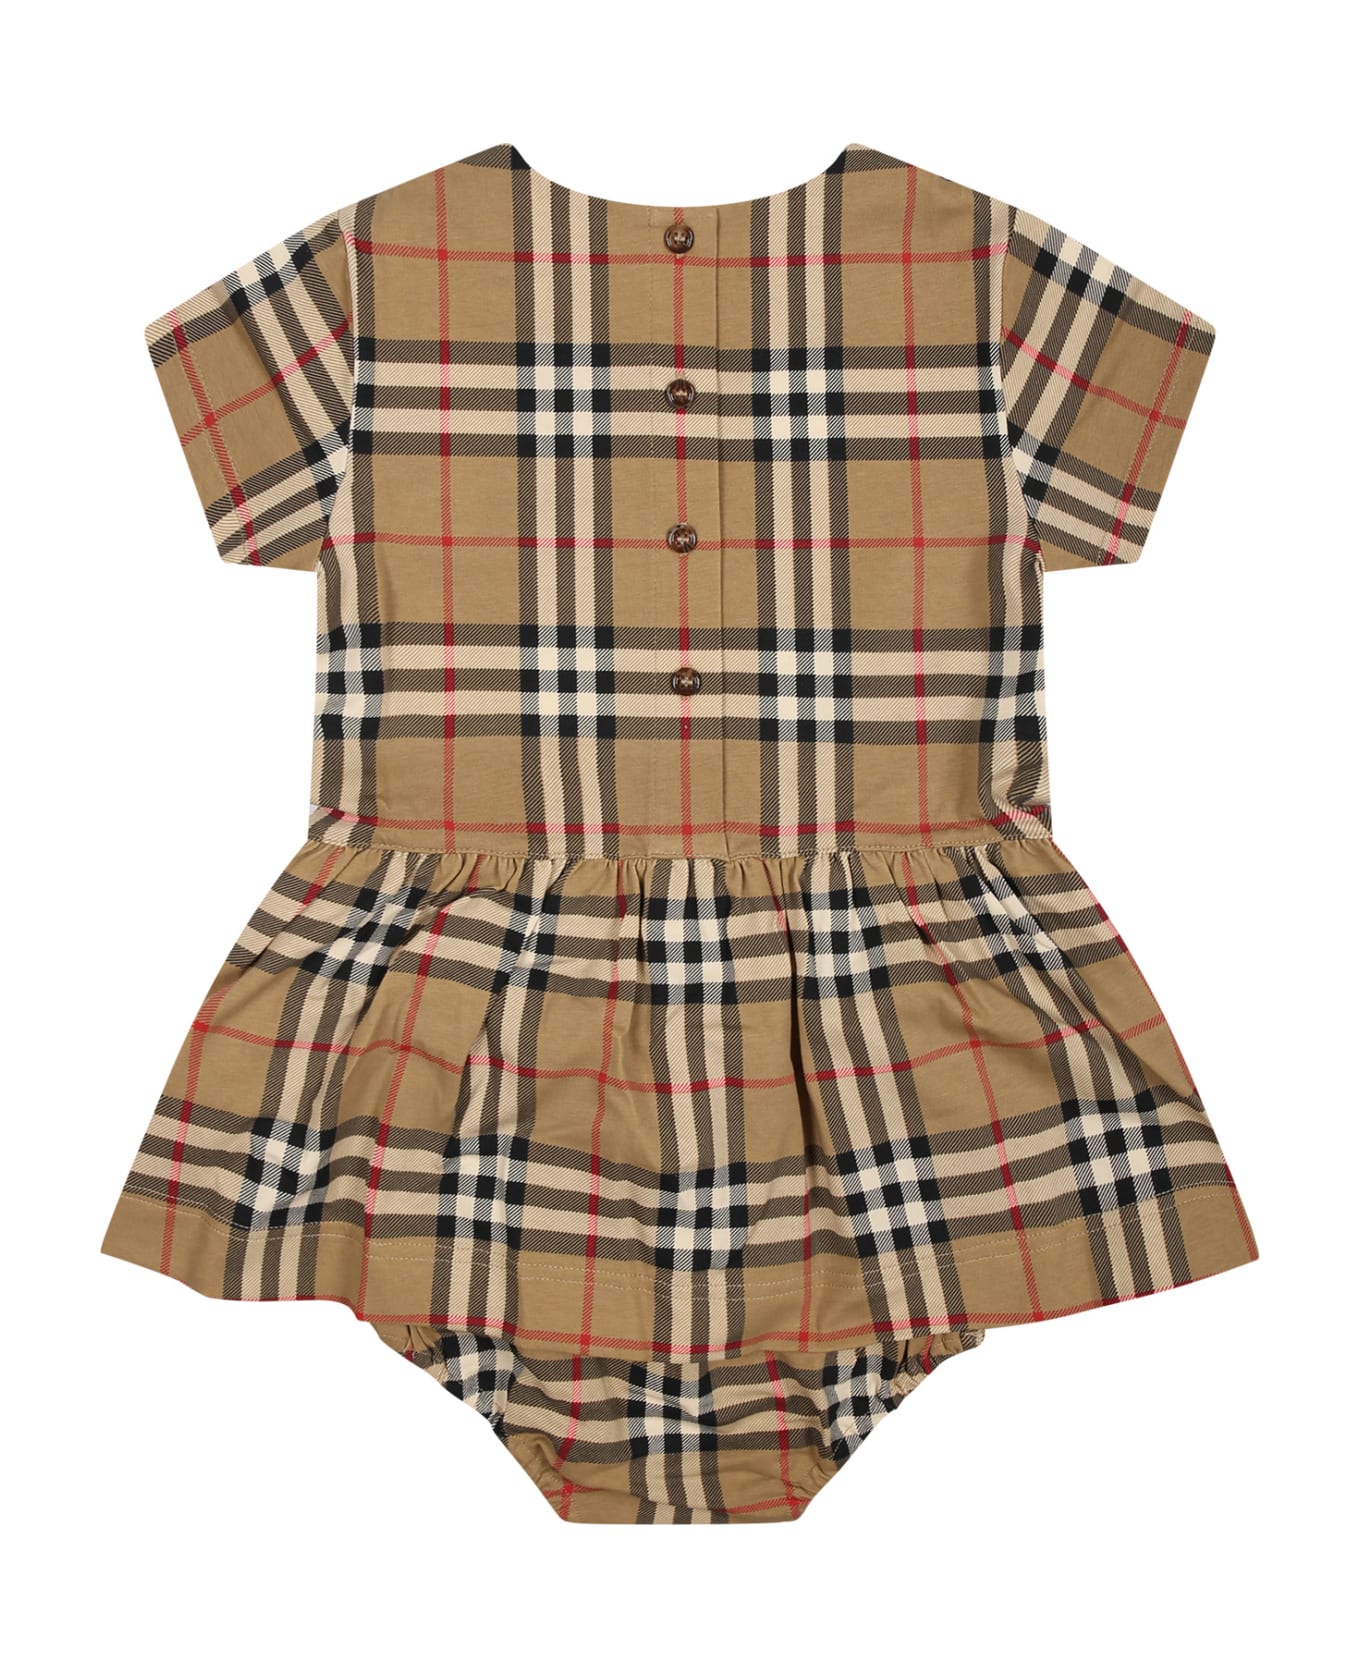 Burberry Beige Dress For Baby Girl With Iconic All-over Vintage Check - Beige